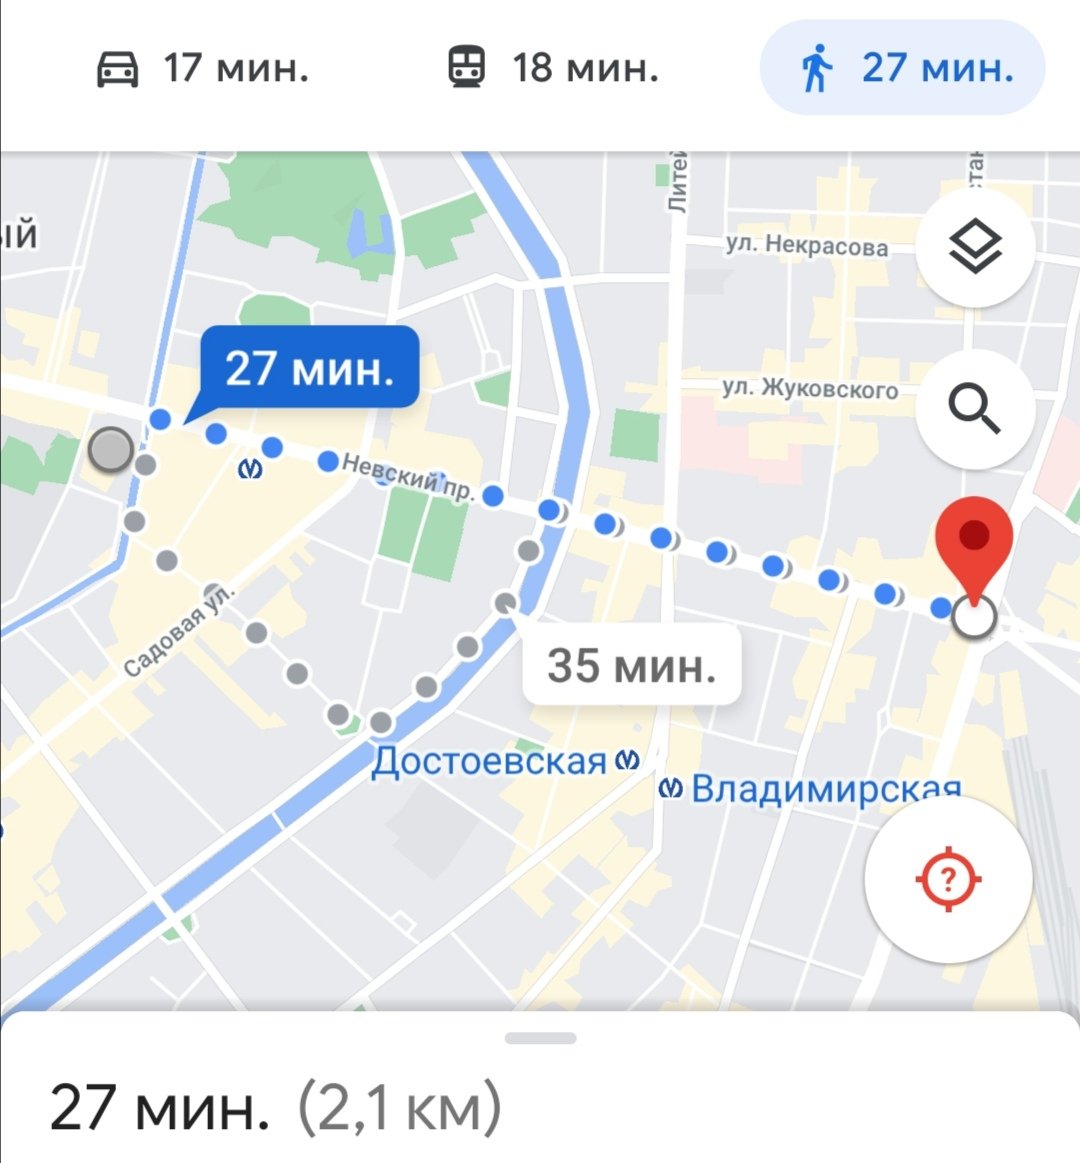 From Nevsky Prospect to Kazan Cathedral, the street is almost fully taken up by pr/testors. And a comparison of just how big that is on a map; a 27 min walk from the Cathedral to the end of the street.St. Petersburgno credit.